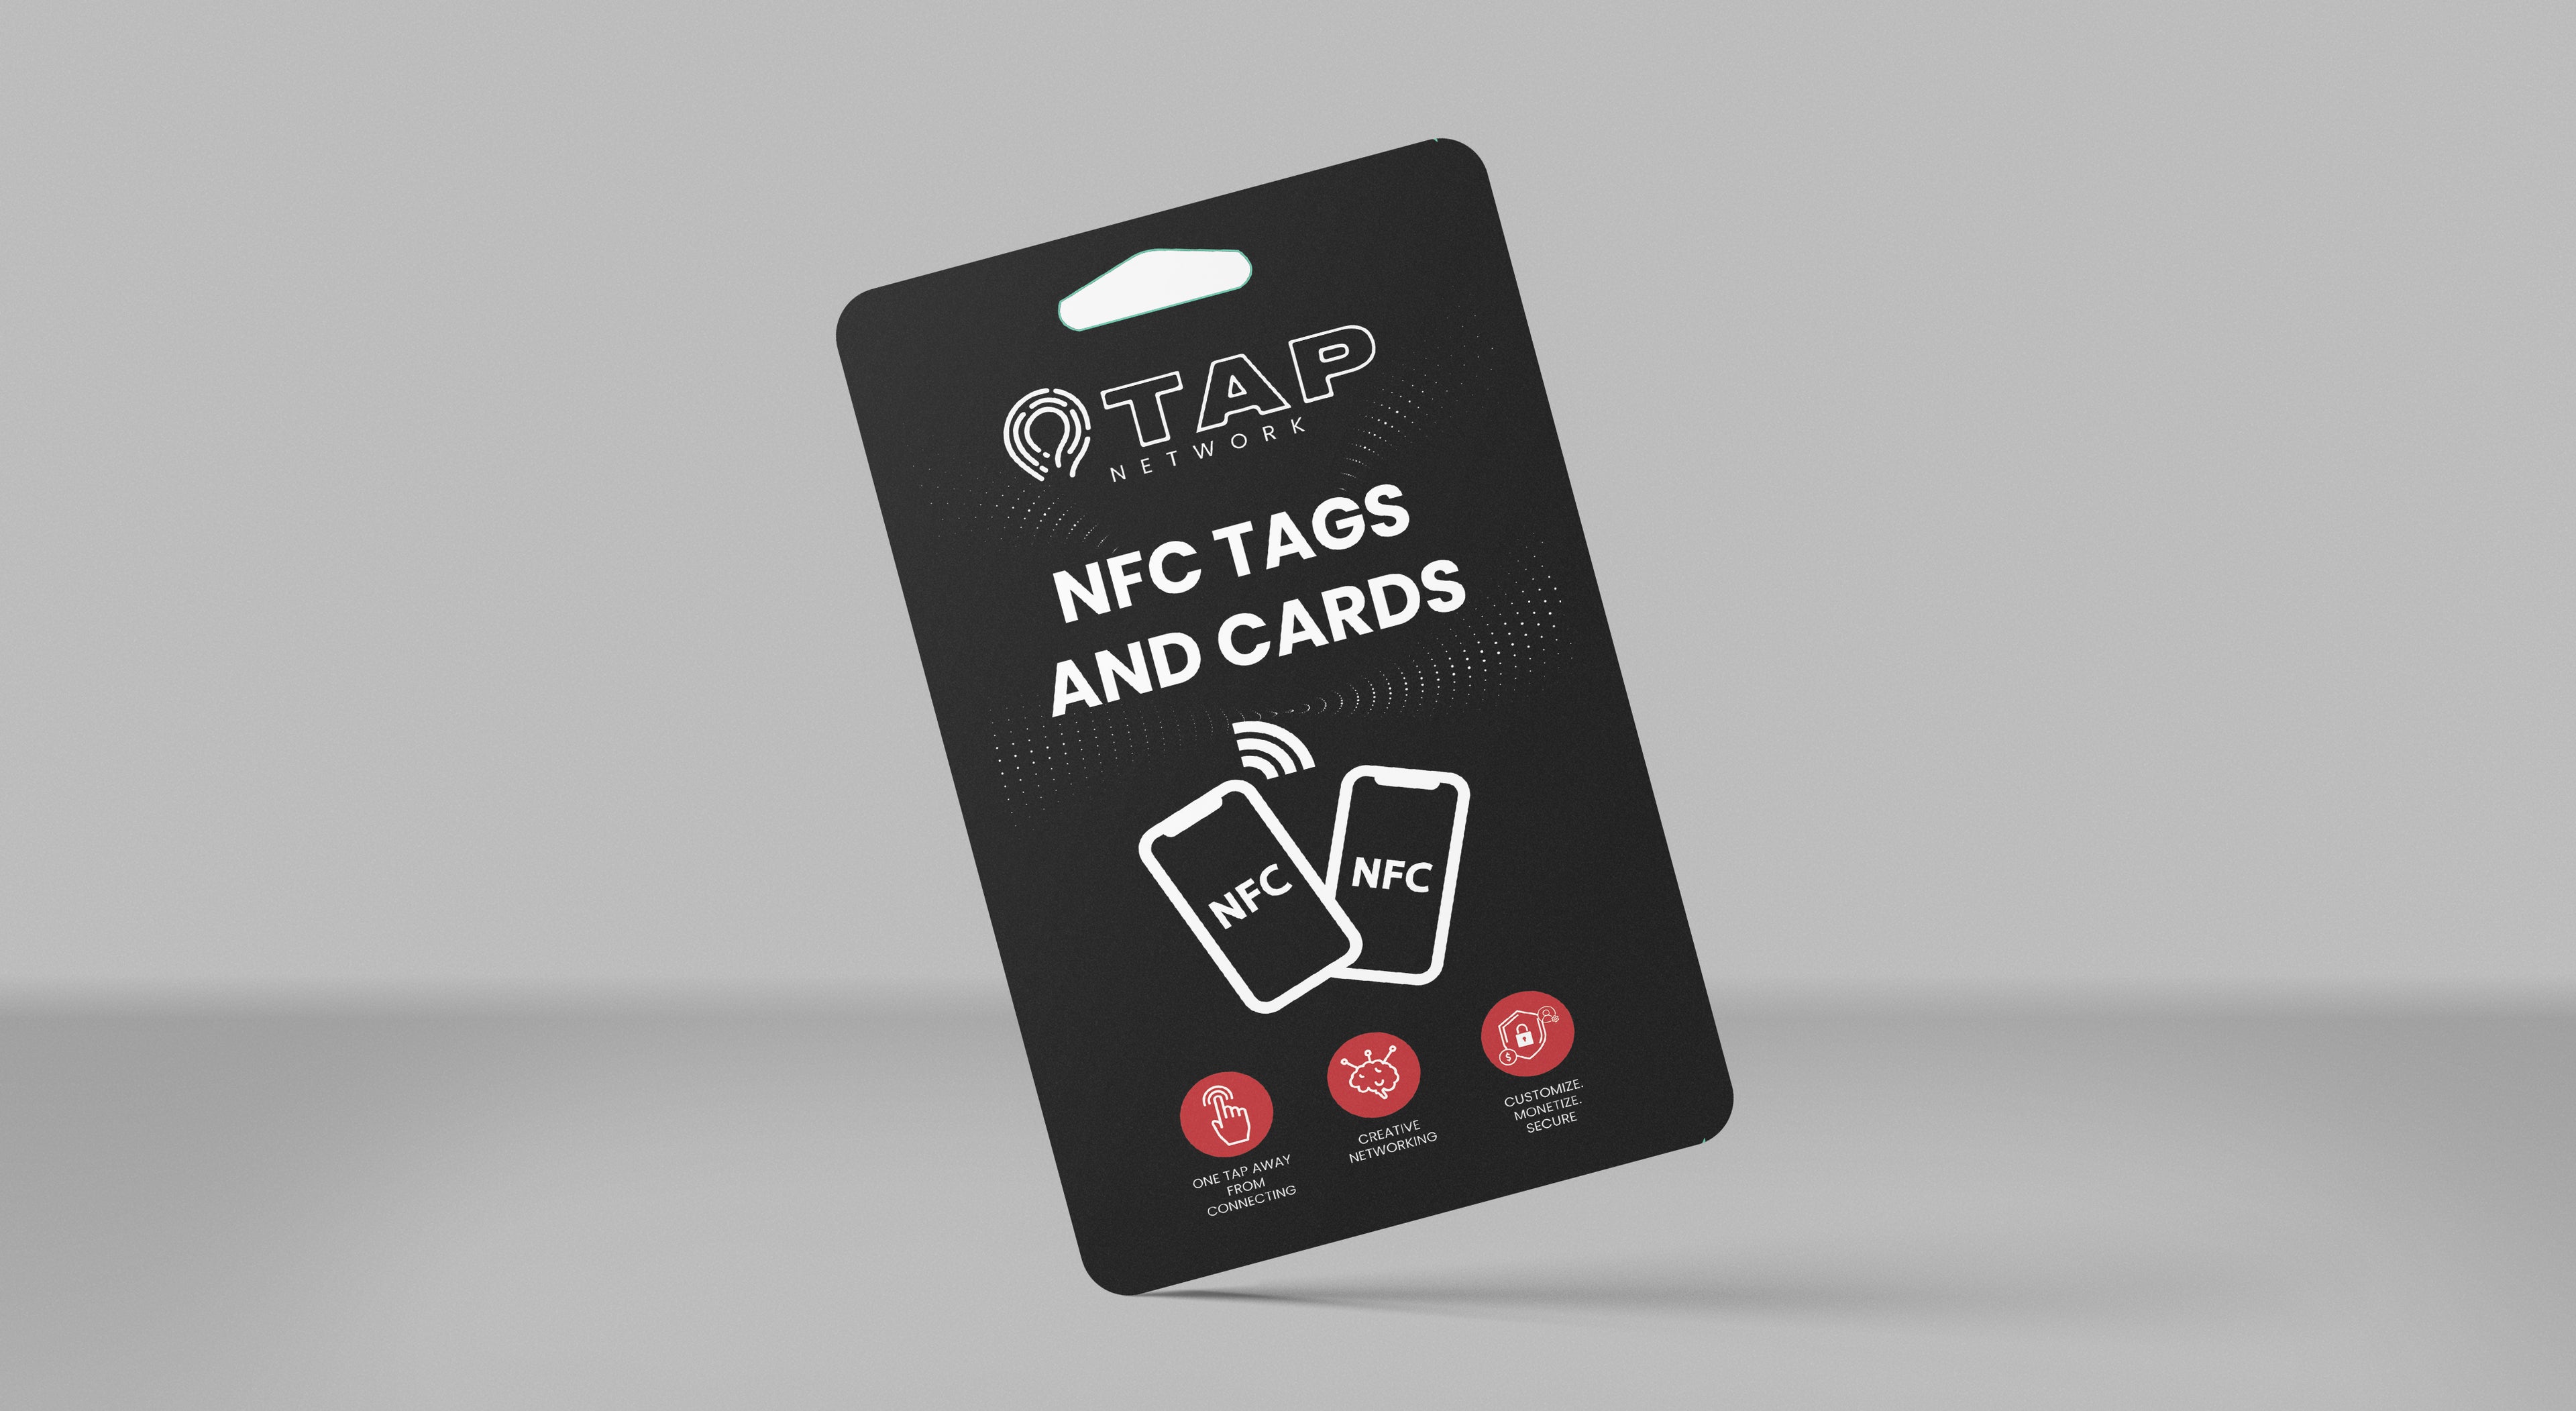 NFC tag packaging displaying three key features: 'One tap away from connecting,' 'Creative networking,' and 'Customize, monetize, secure.' Highlighting the versatile uses and benefits of the NFC technology for professional networking.